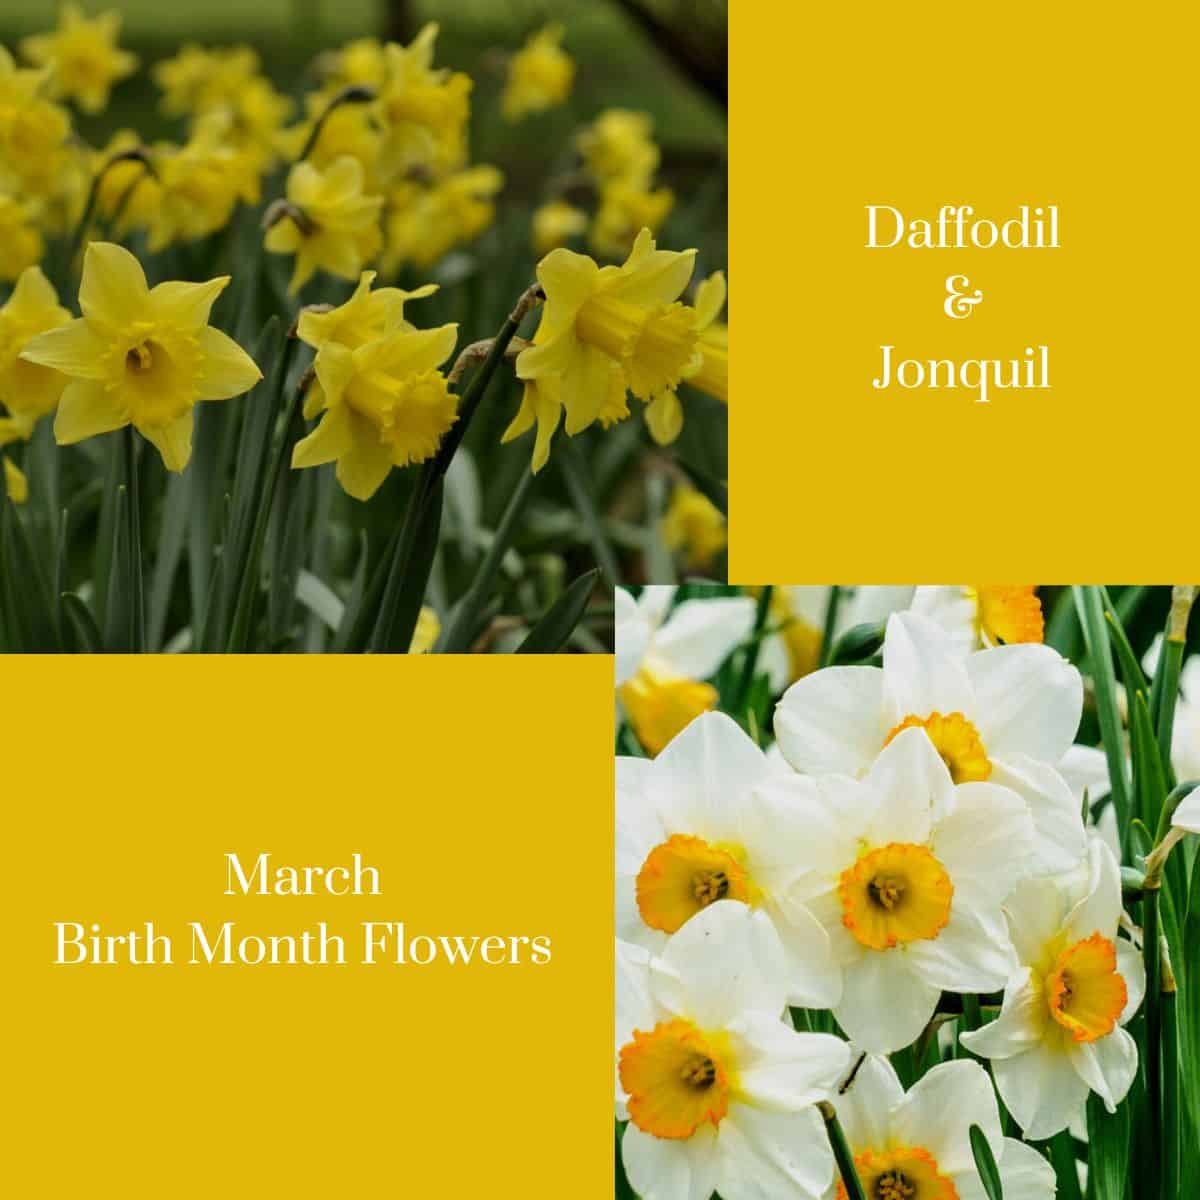 march birth month flowers graphic with daffodil and jonquil